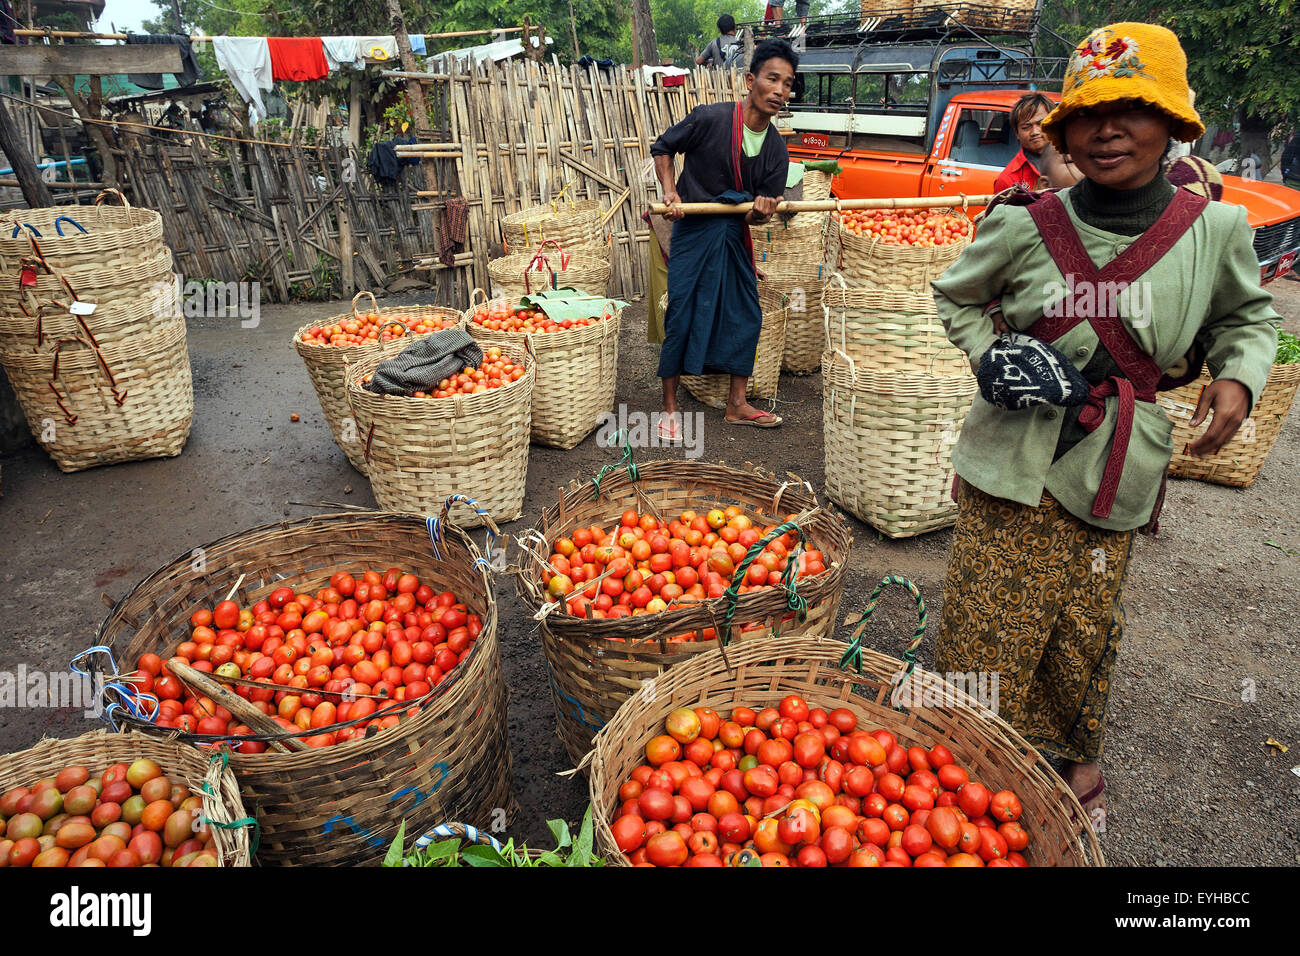 Tomatoes in baskets, market in Nyaungshwe, Shan State, Myanmar Stock Photo